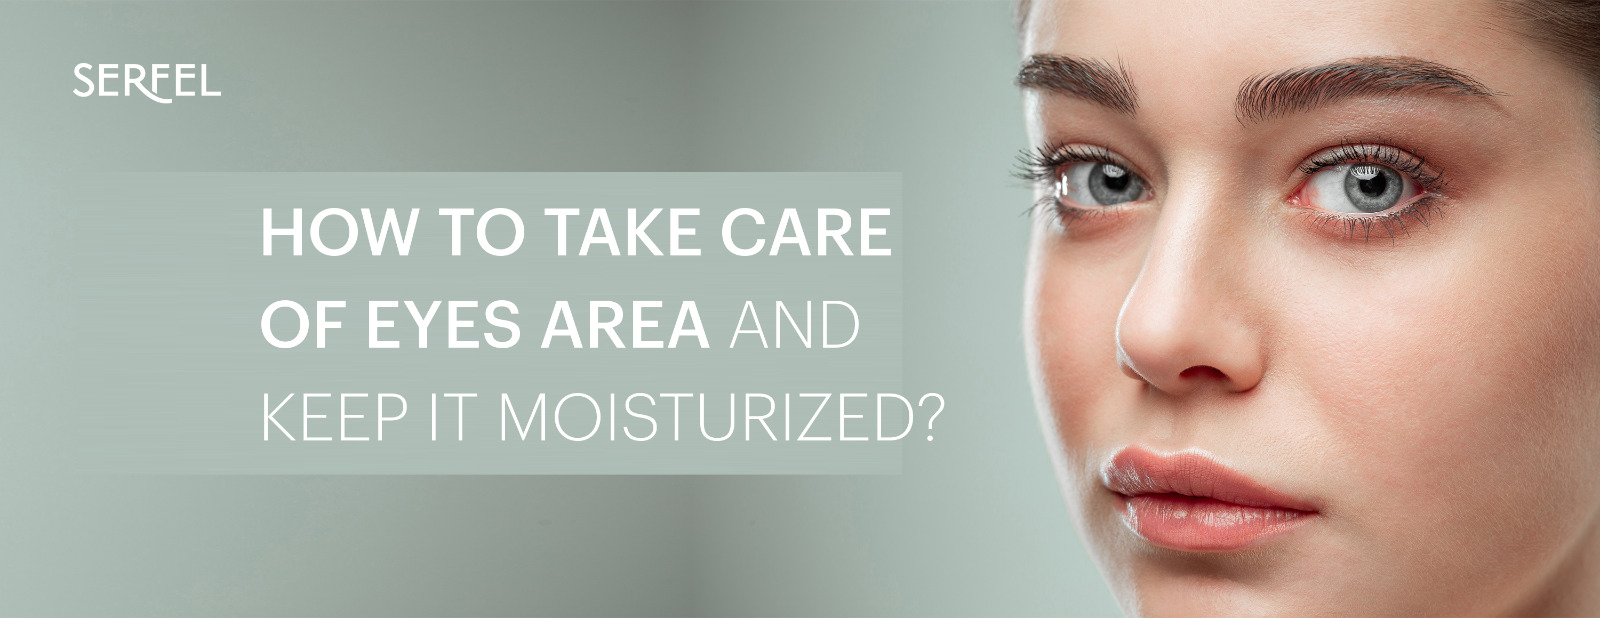 How to Take Care of Eyes Area And Keep It Moisturized